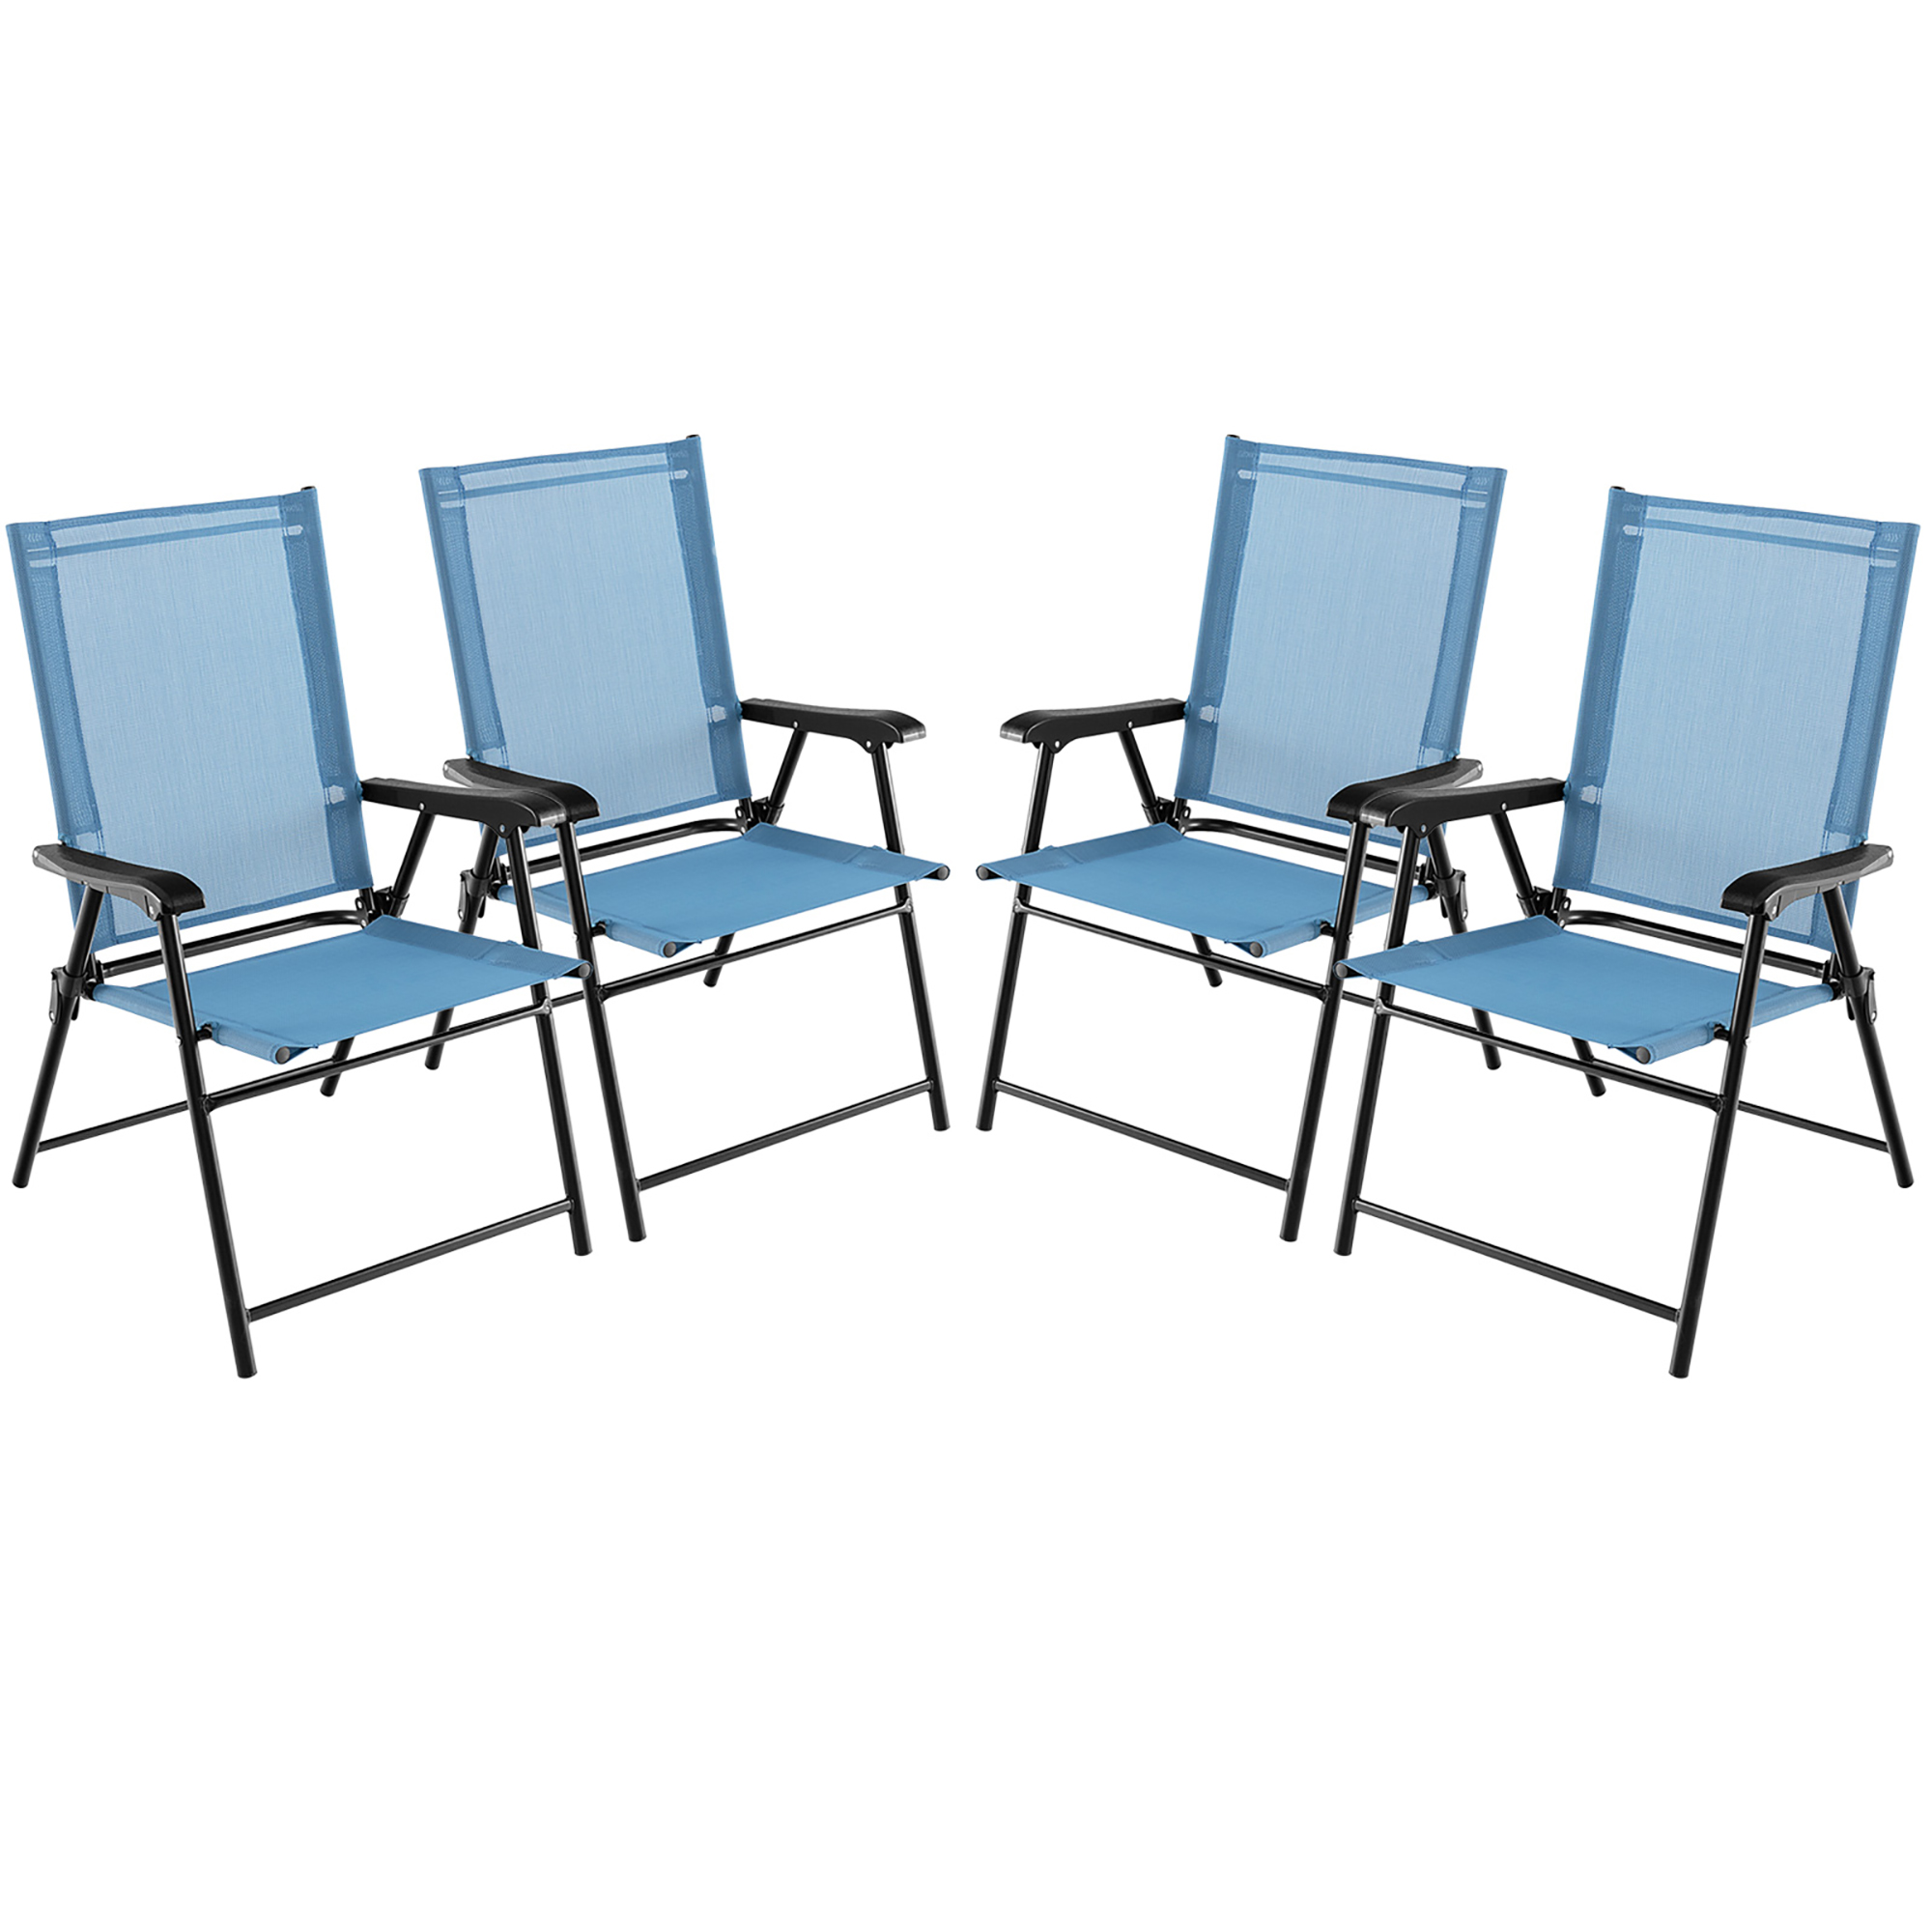 Gymax Set of 4 Patio Folding Chairs Outdoor Portable Pack Lawn Chairs w/ Armrests Blue - image 1 of 10